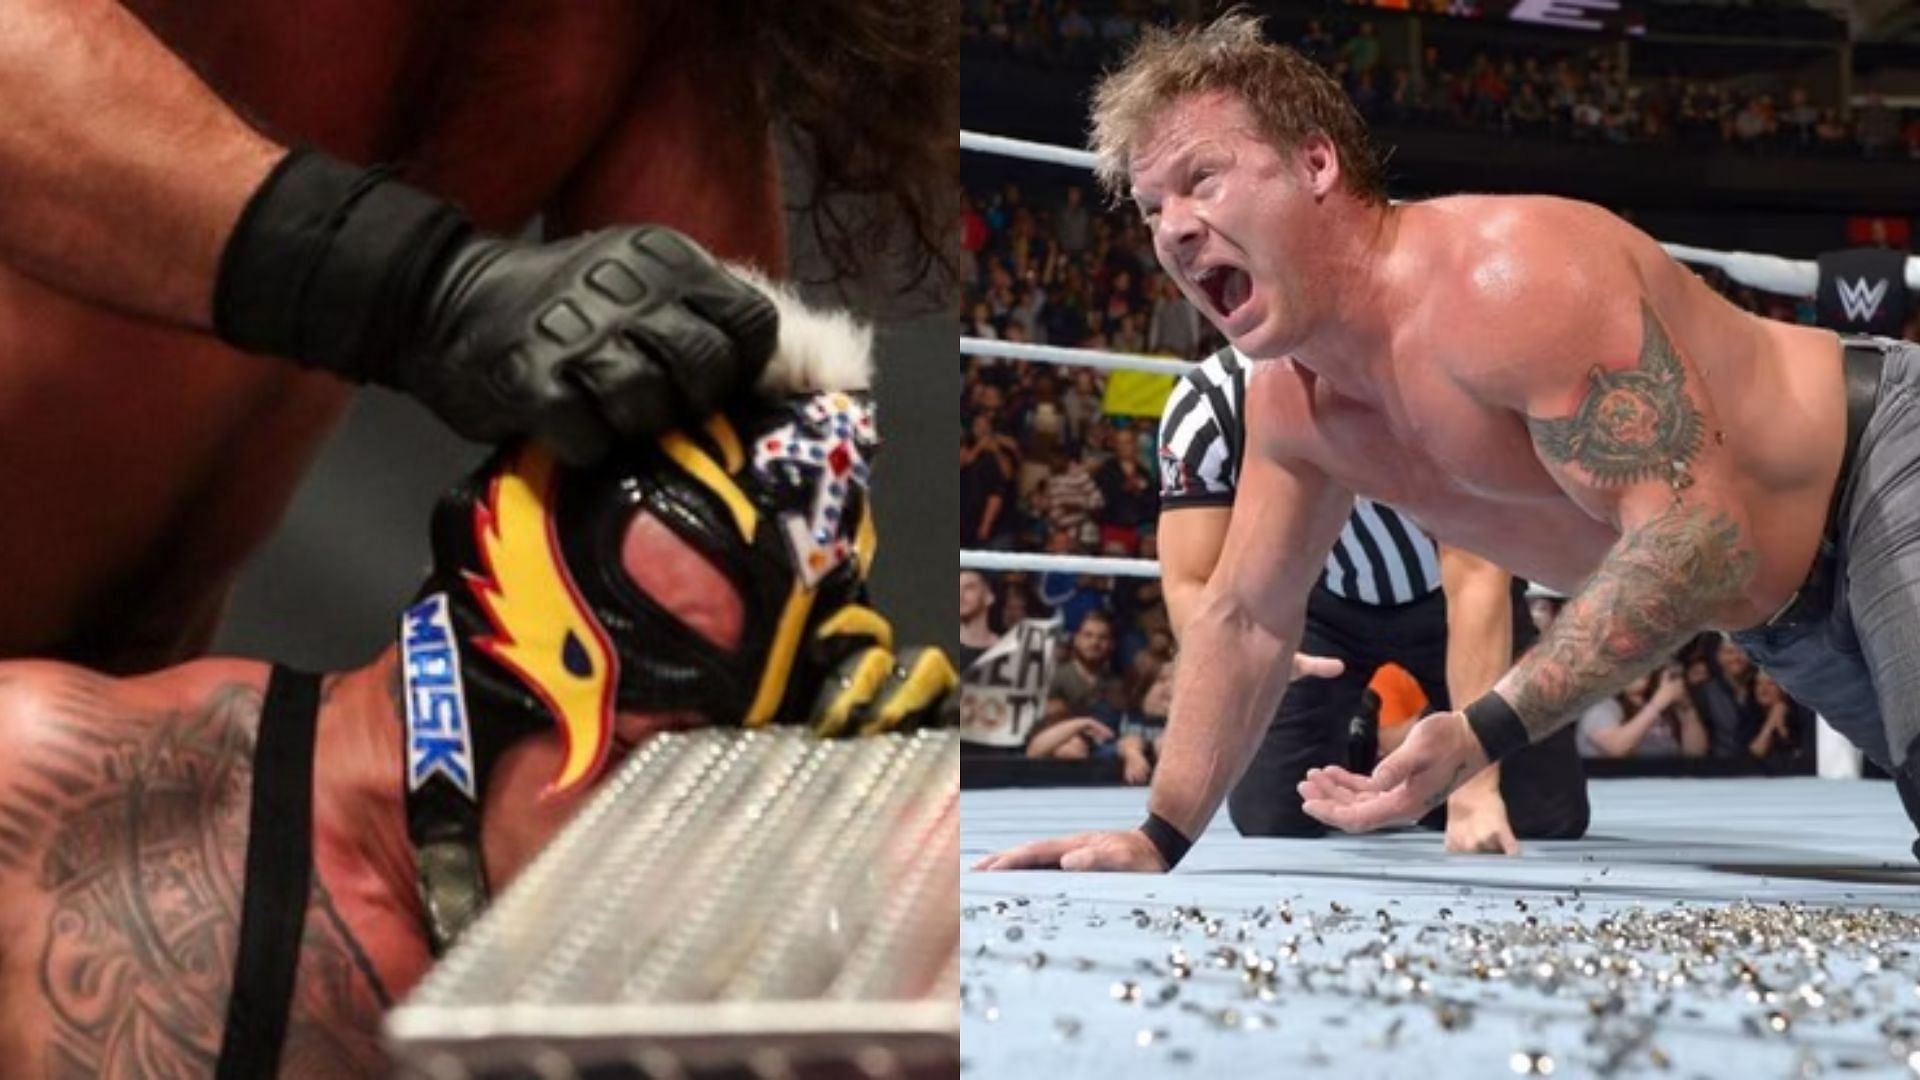 WWE has given us some truly jaw-dropping non-PG moments